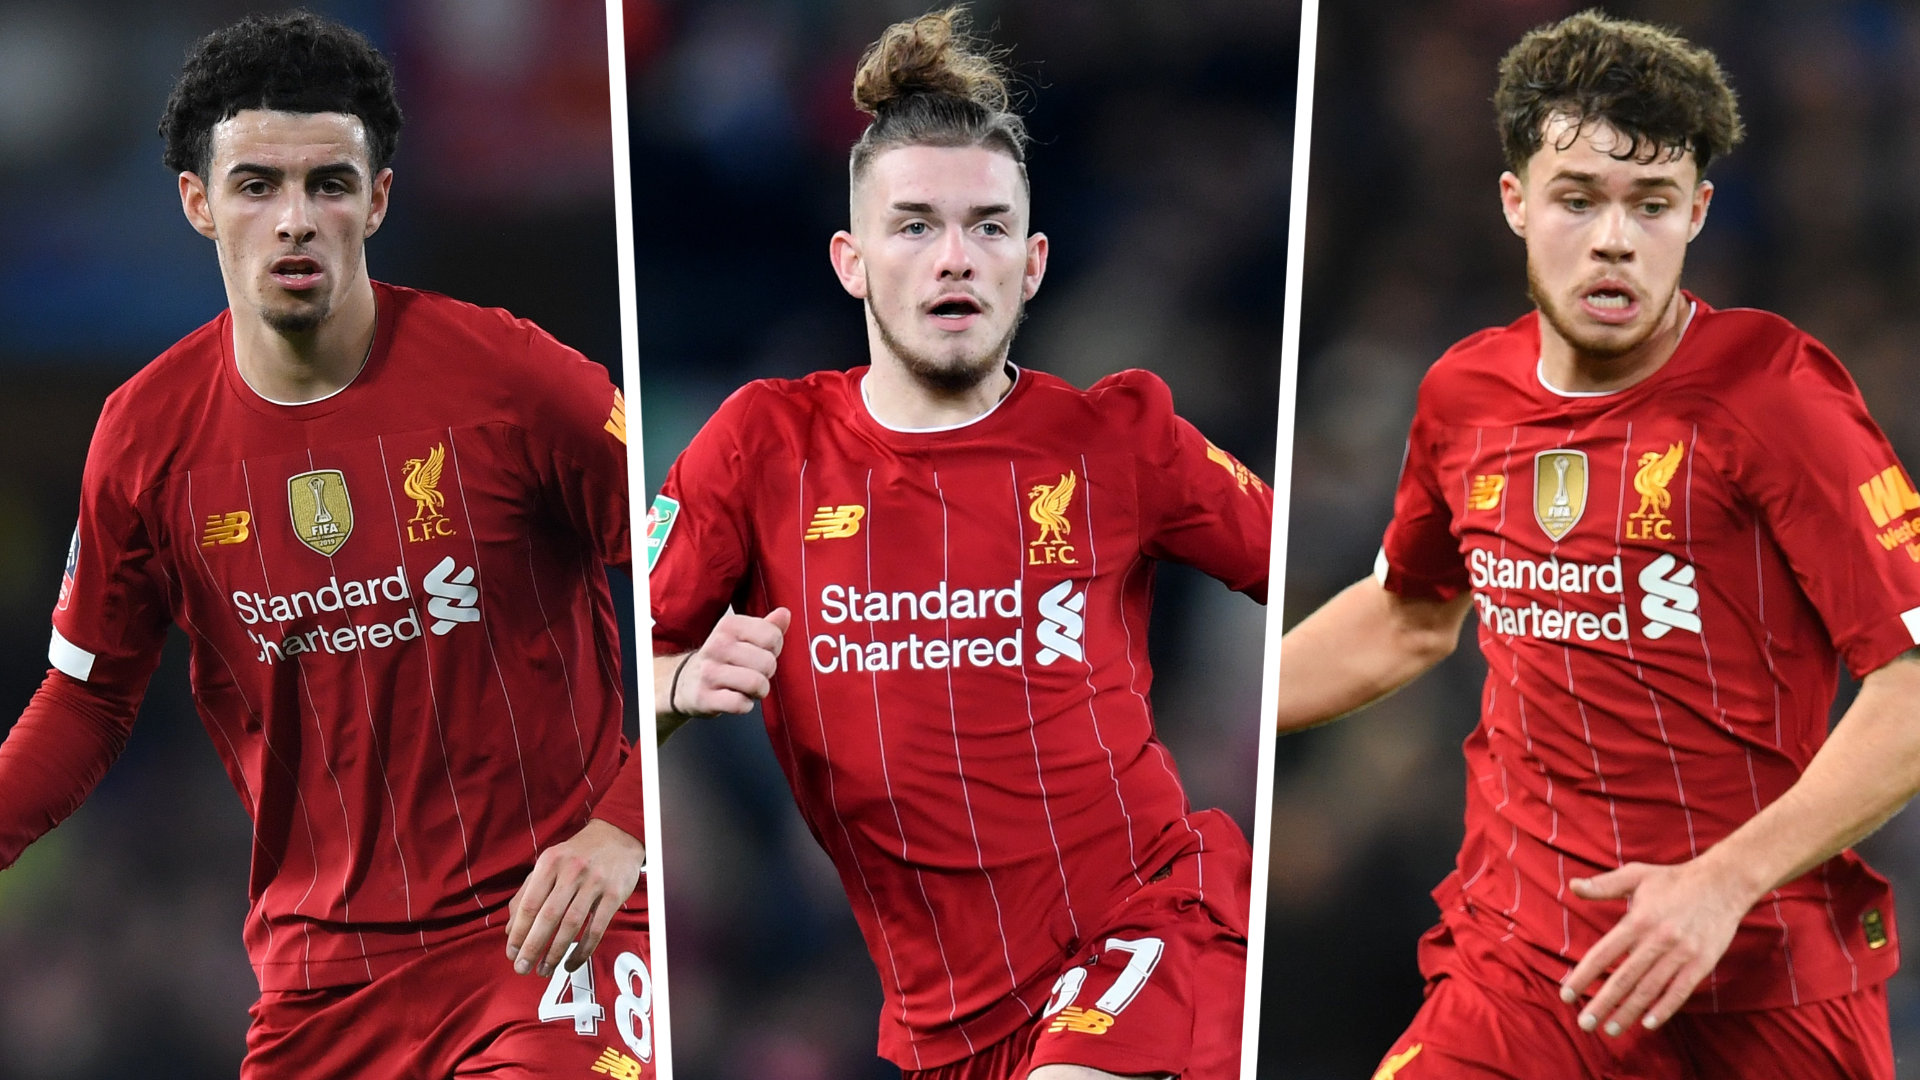 Elliott, Jones and Williams will get Premier League medals - even if Liverpool manager Klopp has to give his away